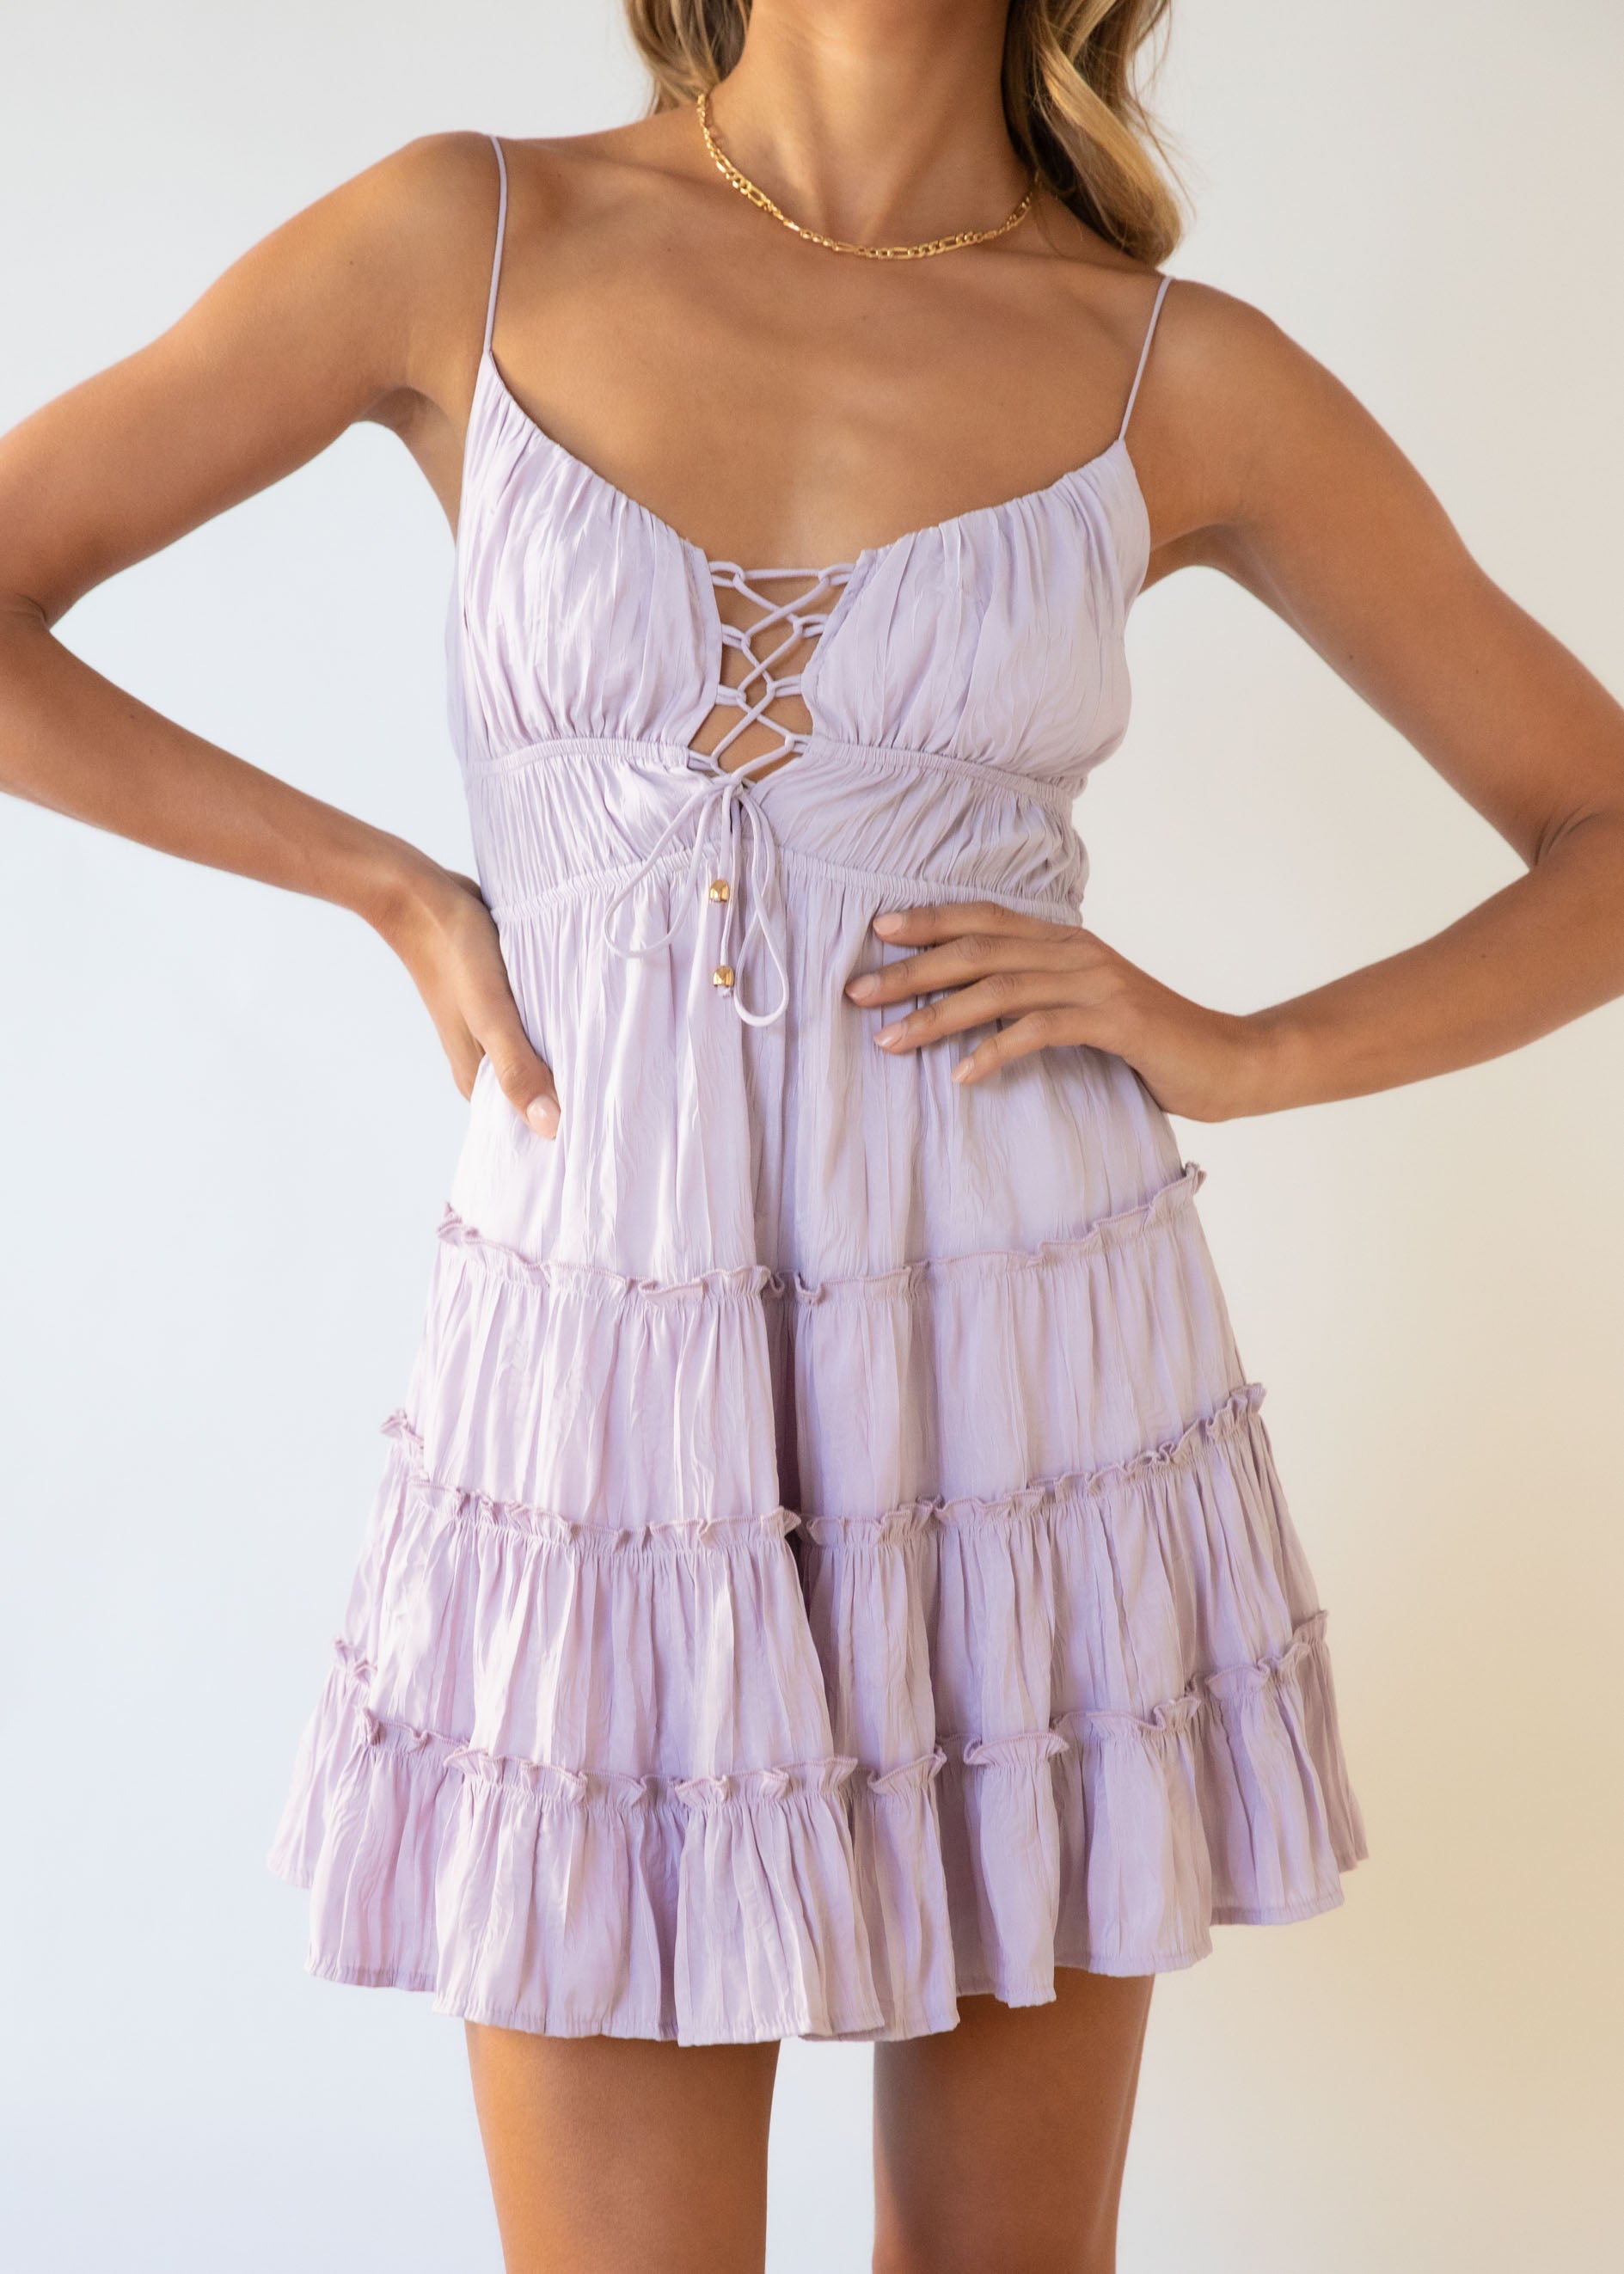 Laced And Ready Dress - Lilac